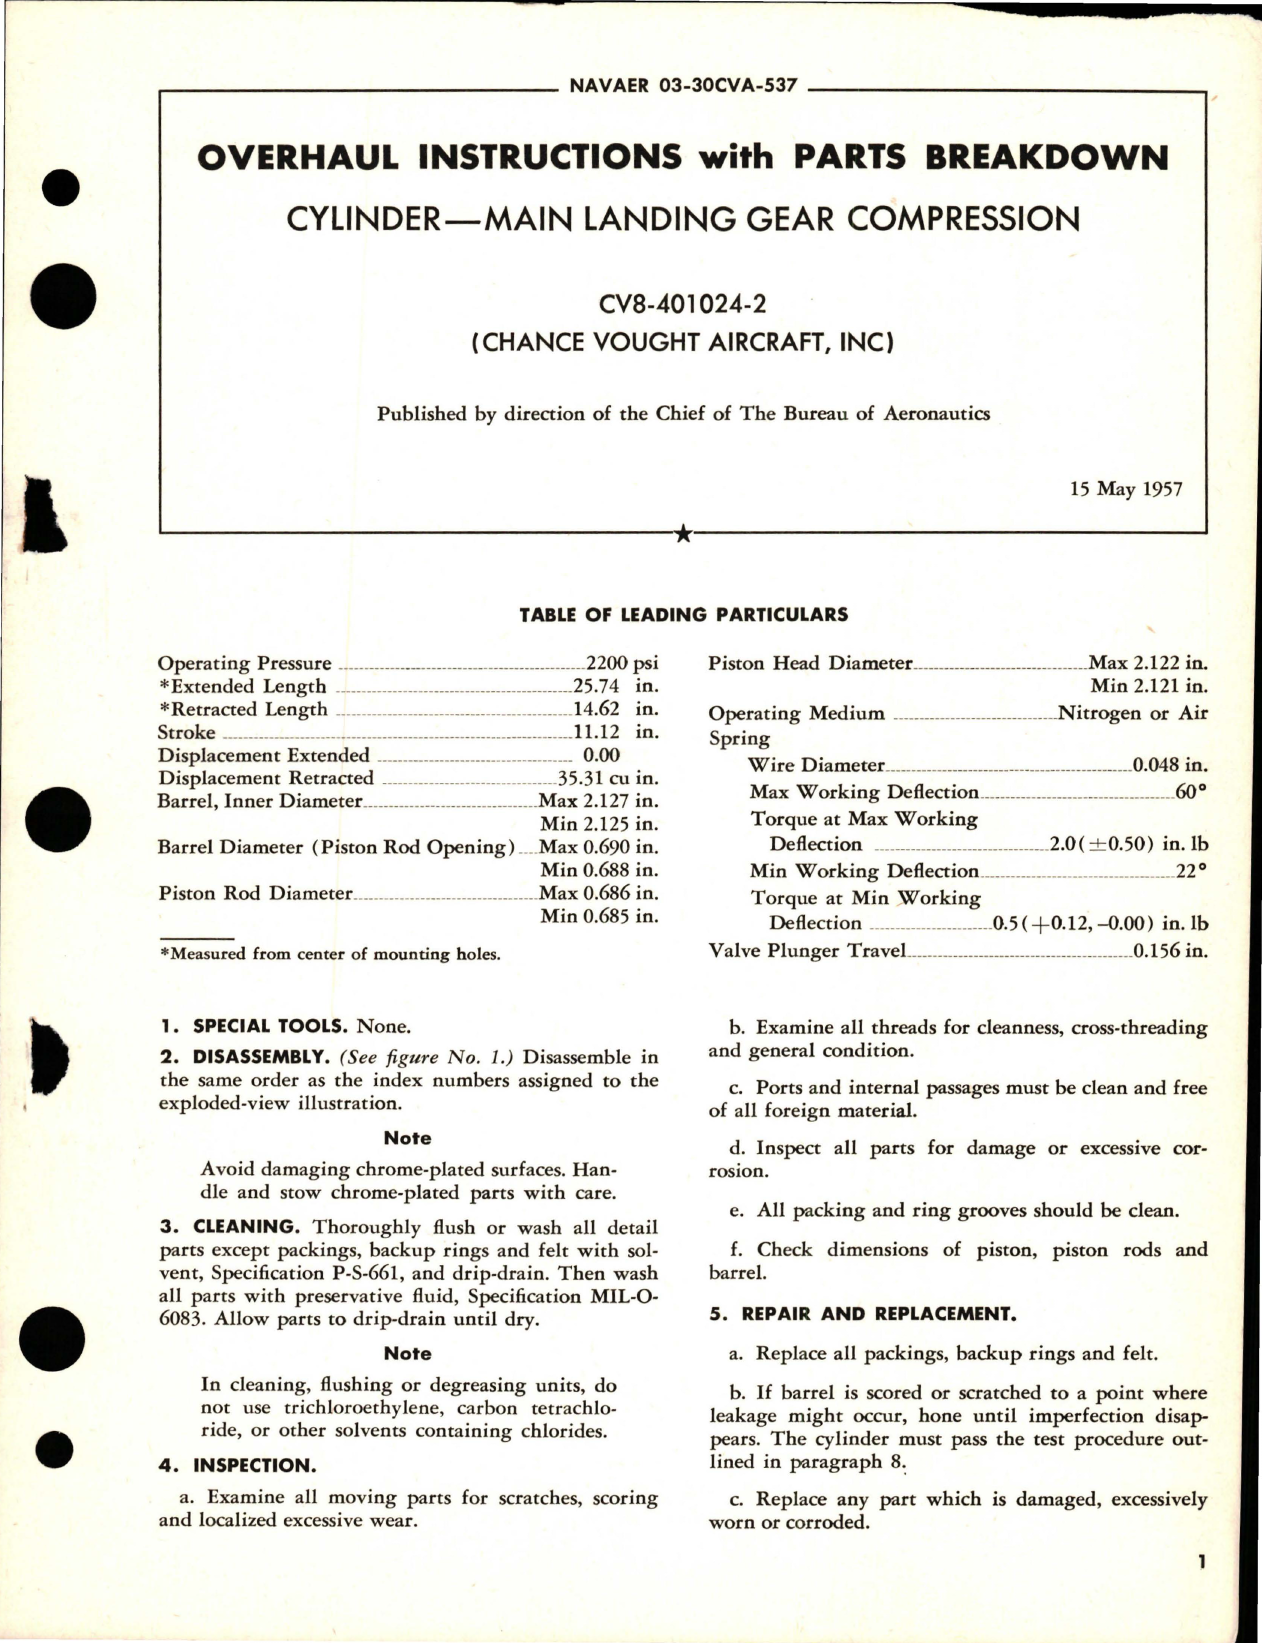 Sample page 1 from AirCorps Library document: Overhaul Instructions with Parts Breakdown for Main Landing Gear Compression Cylinder - CV8-401024-2